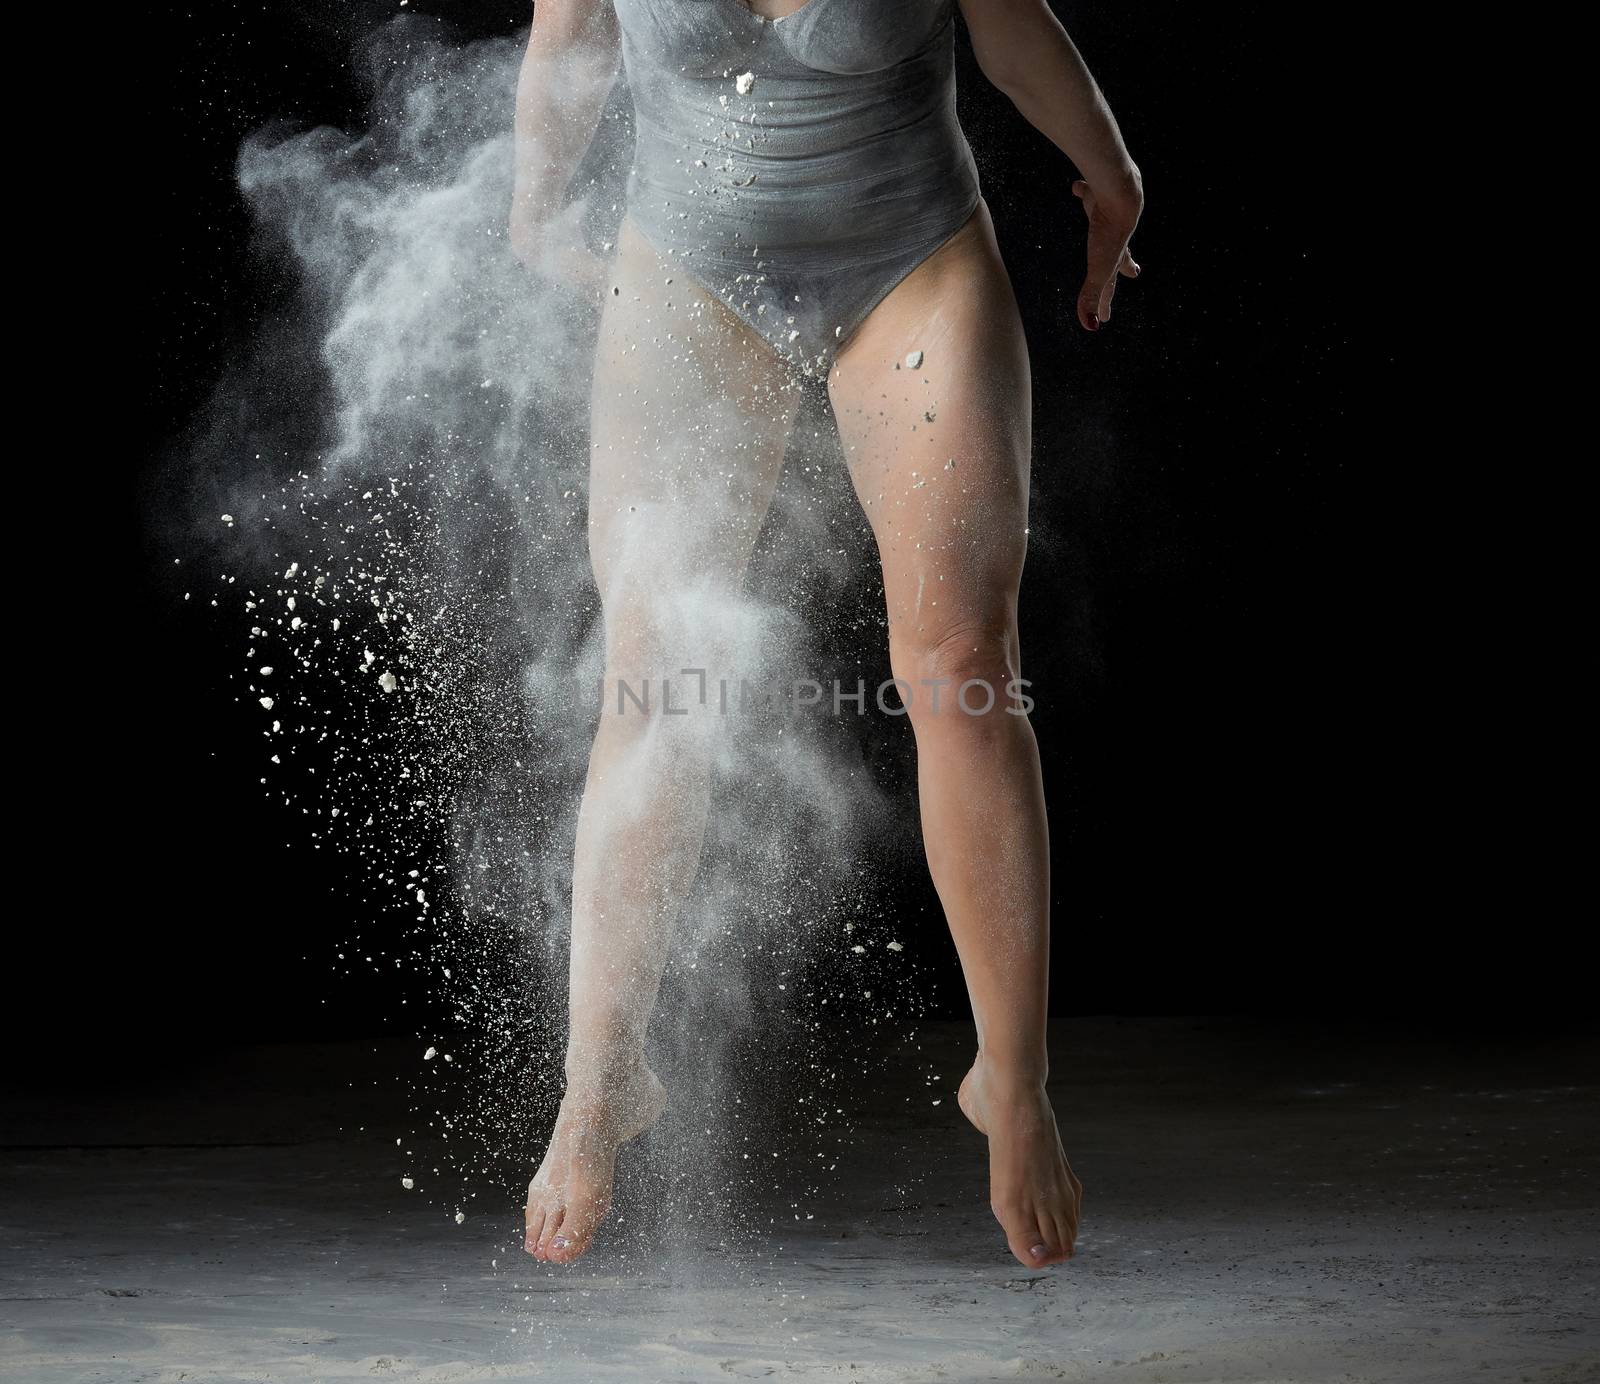 muscular legs of a dancing athlete in a jump, white flour dust c by ndanko